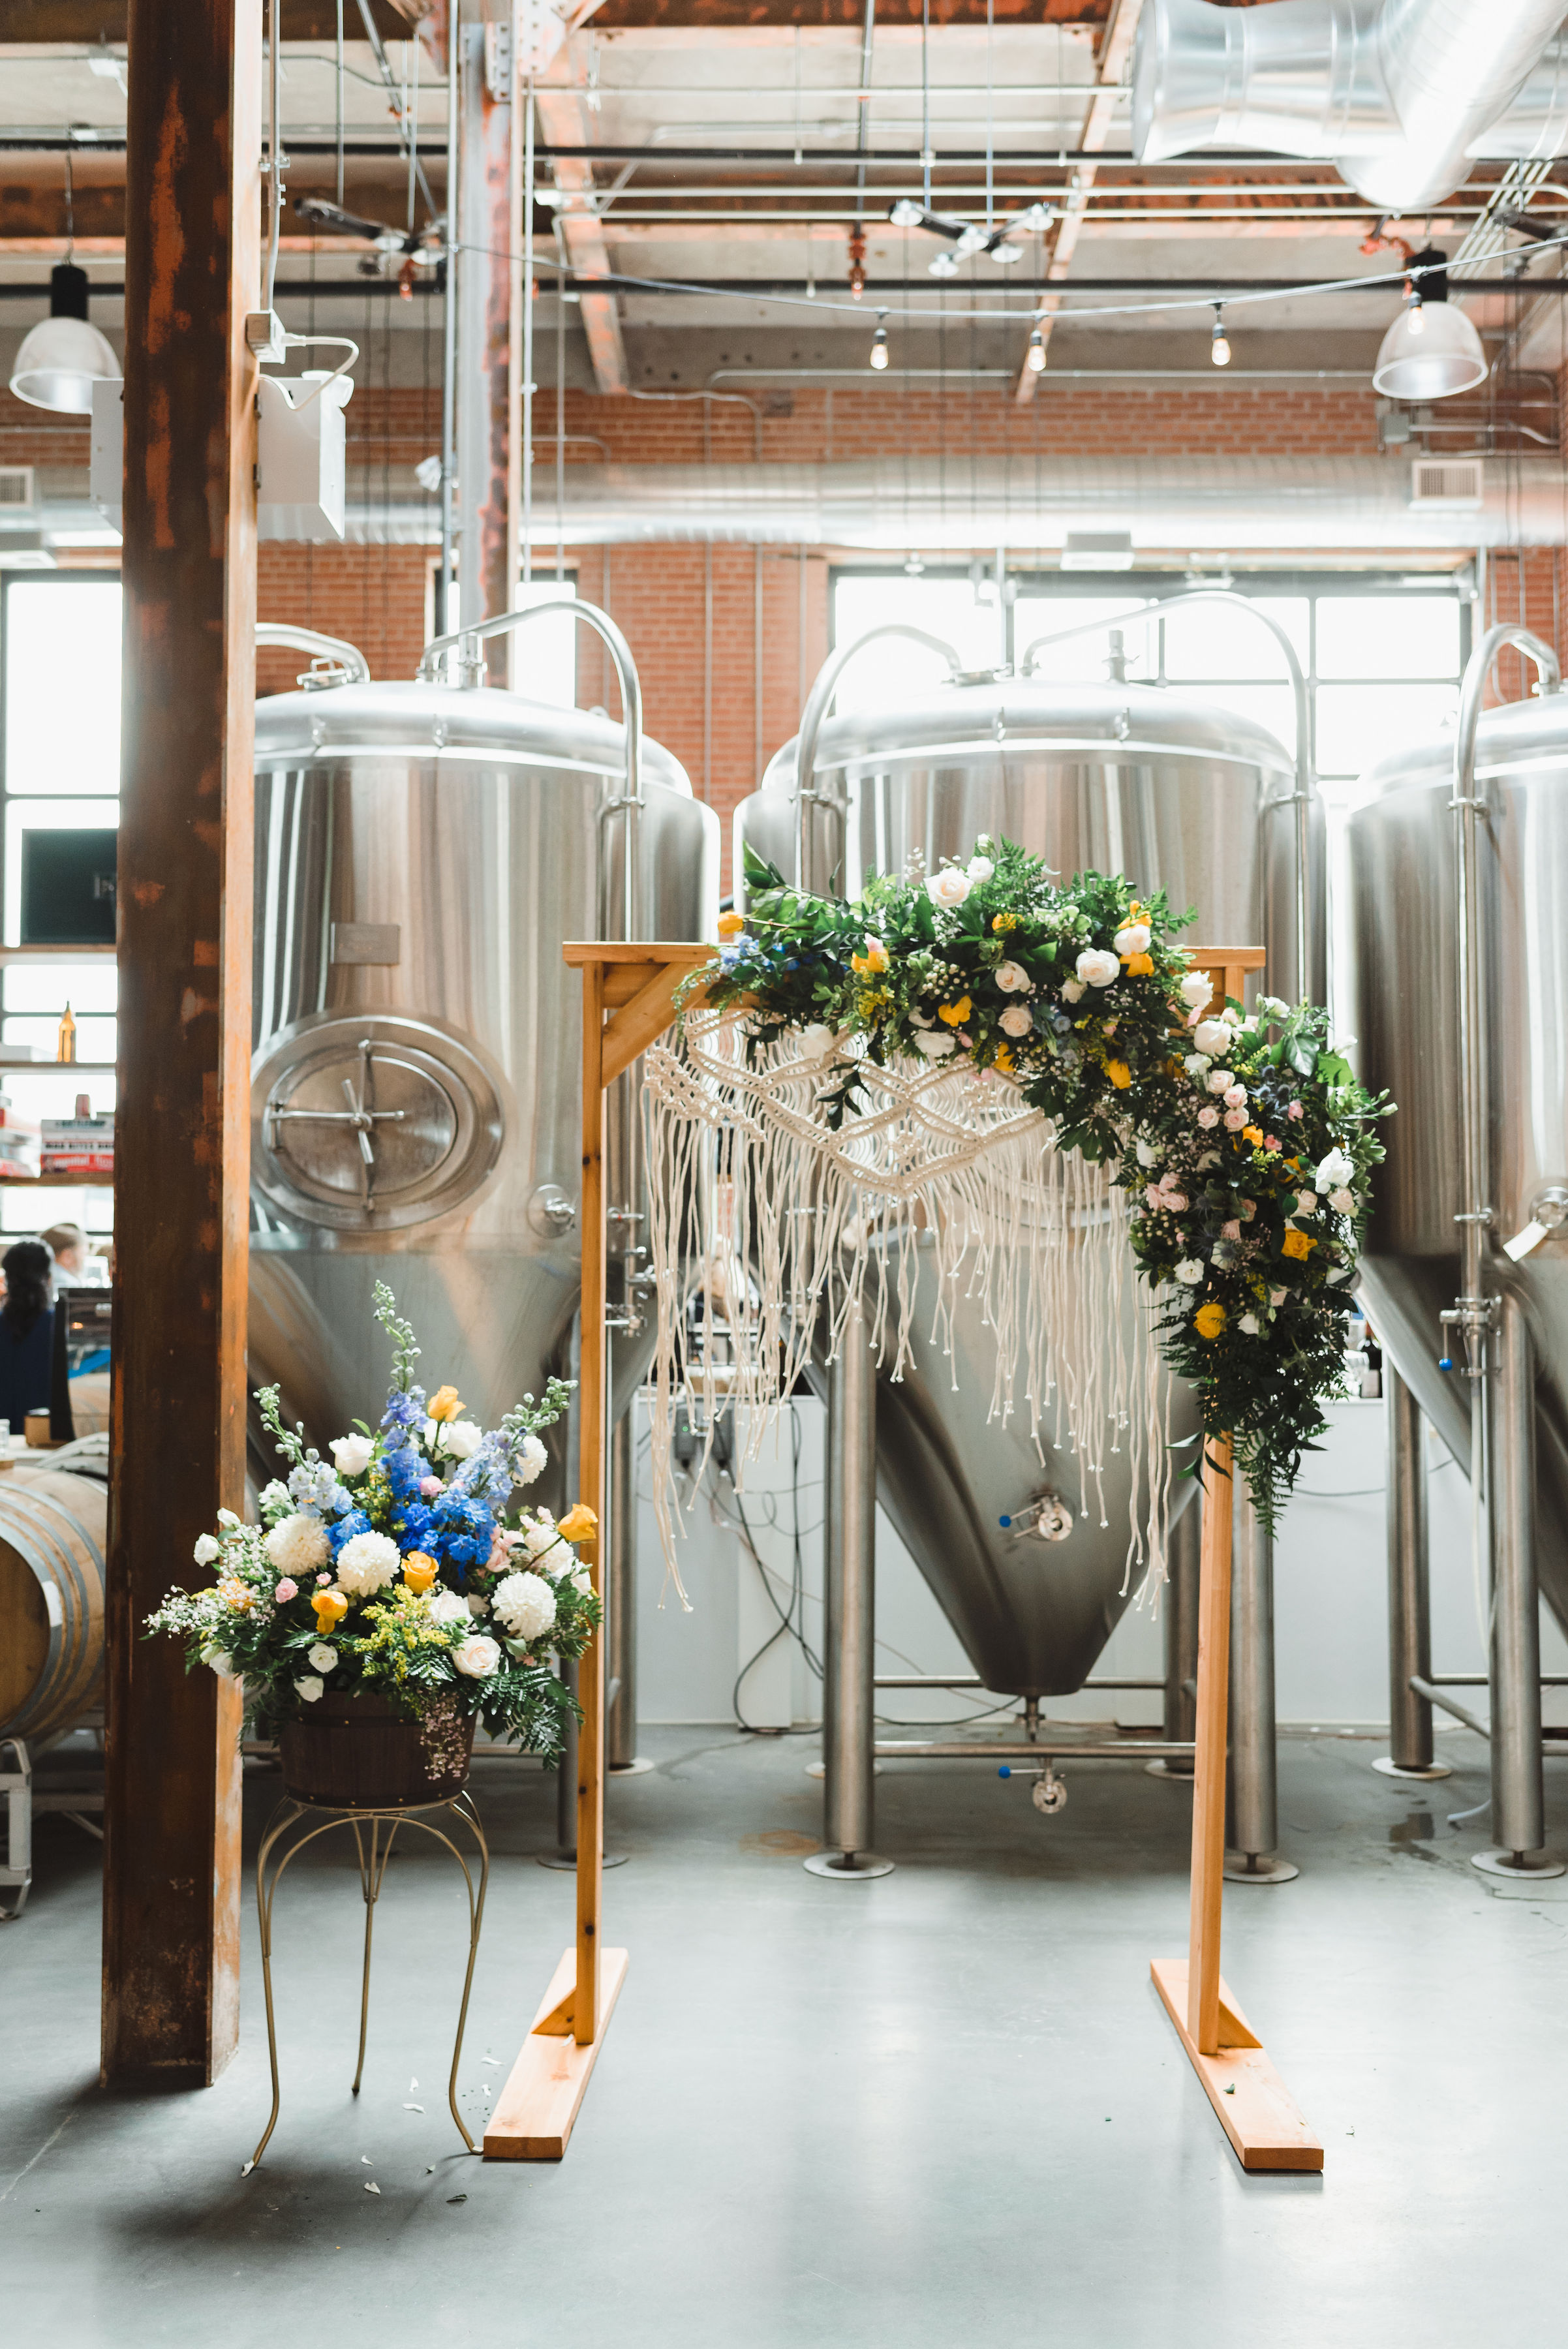 wedding alter set up in front of brewing tanks Toronto Junction Craft Brewing wedding